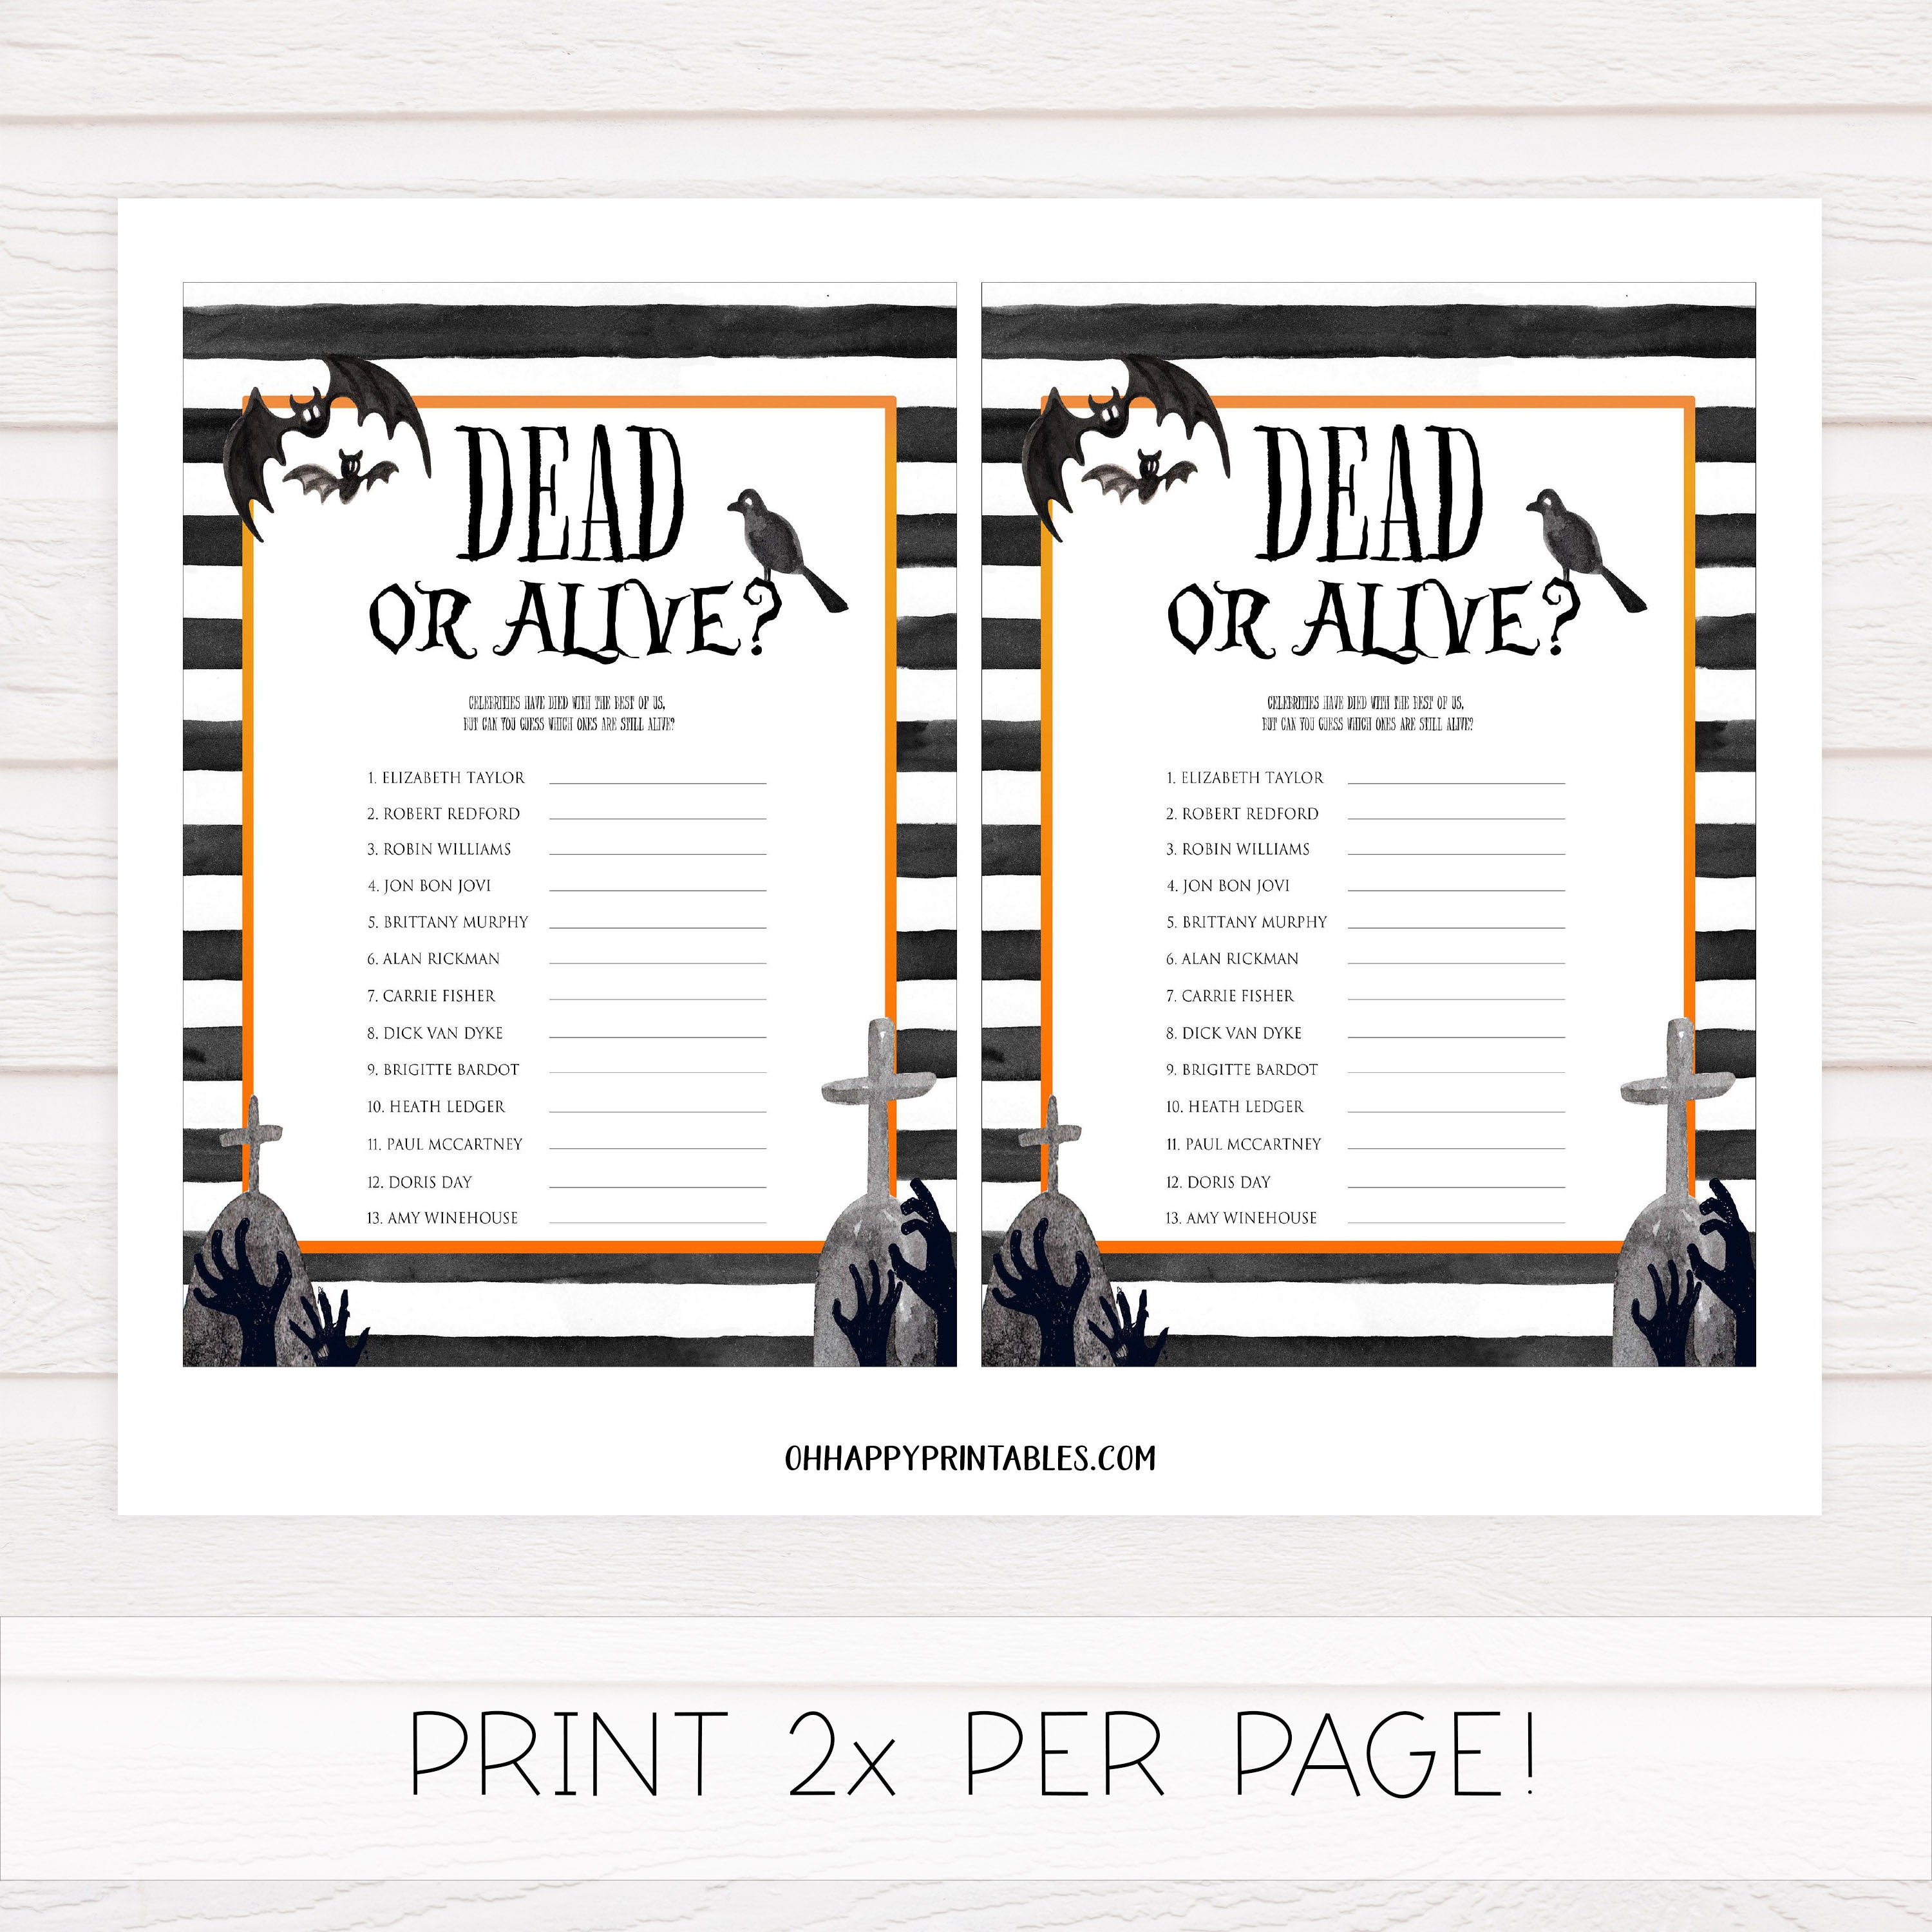 dead or alive game, guess if they are dead or alive, halloween party games, halloween games, fun halloween games, kids halloween games